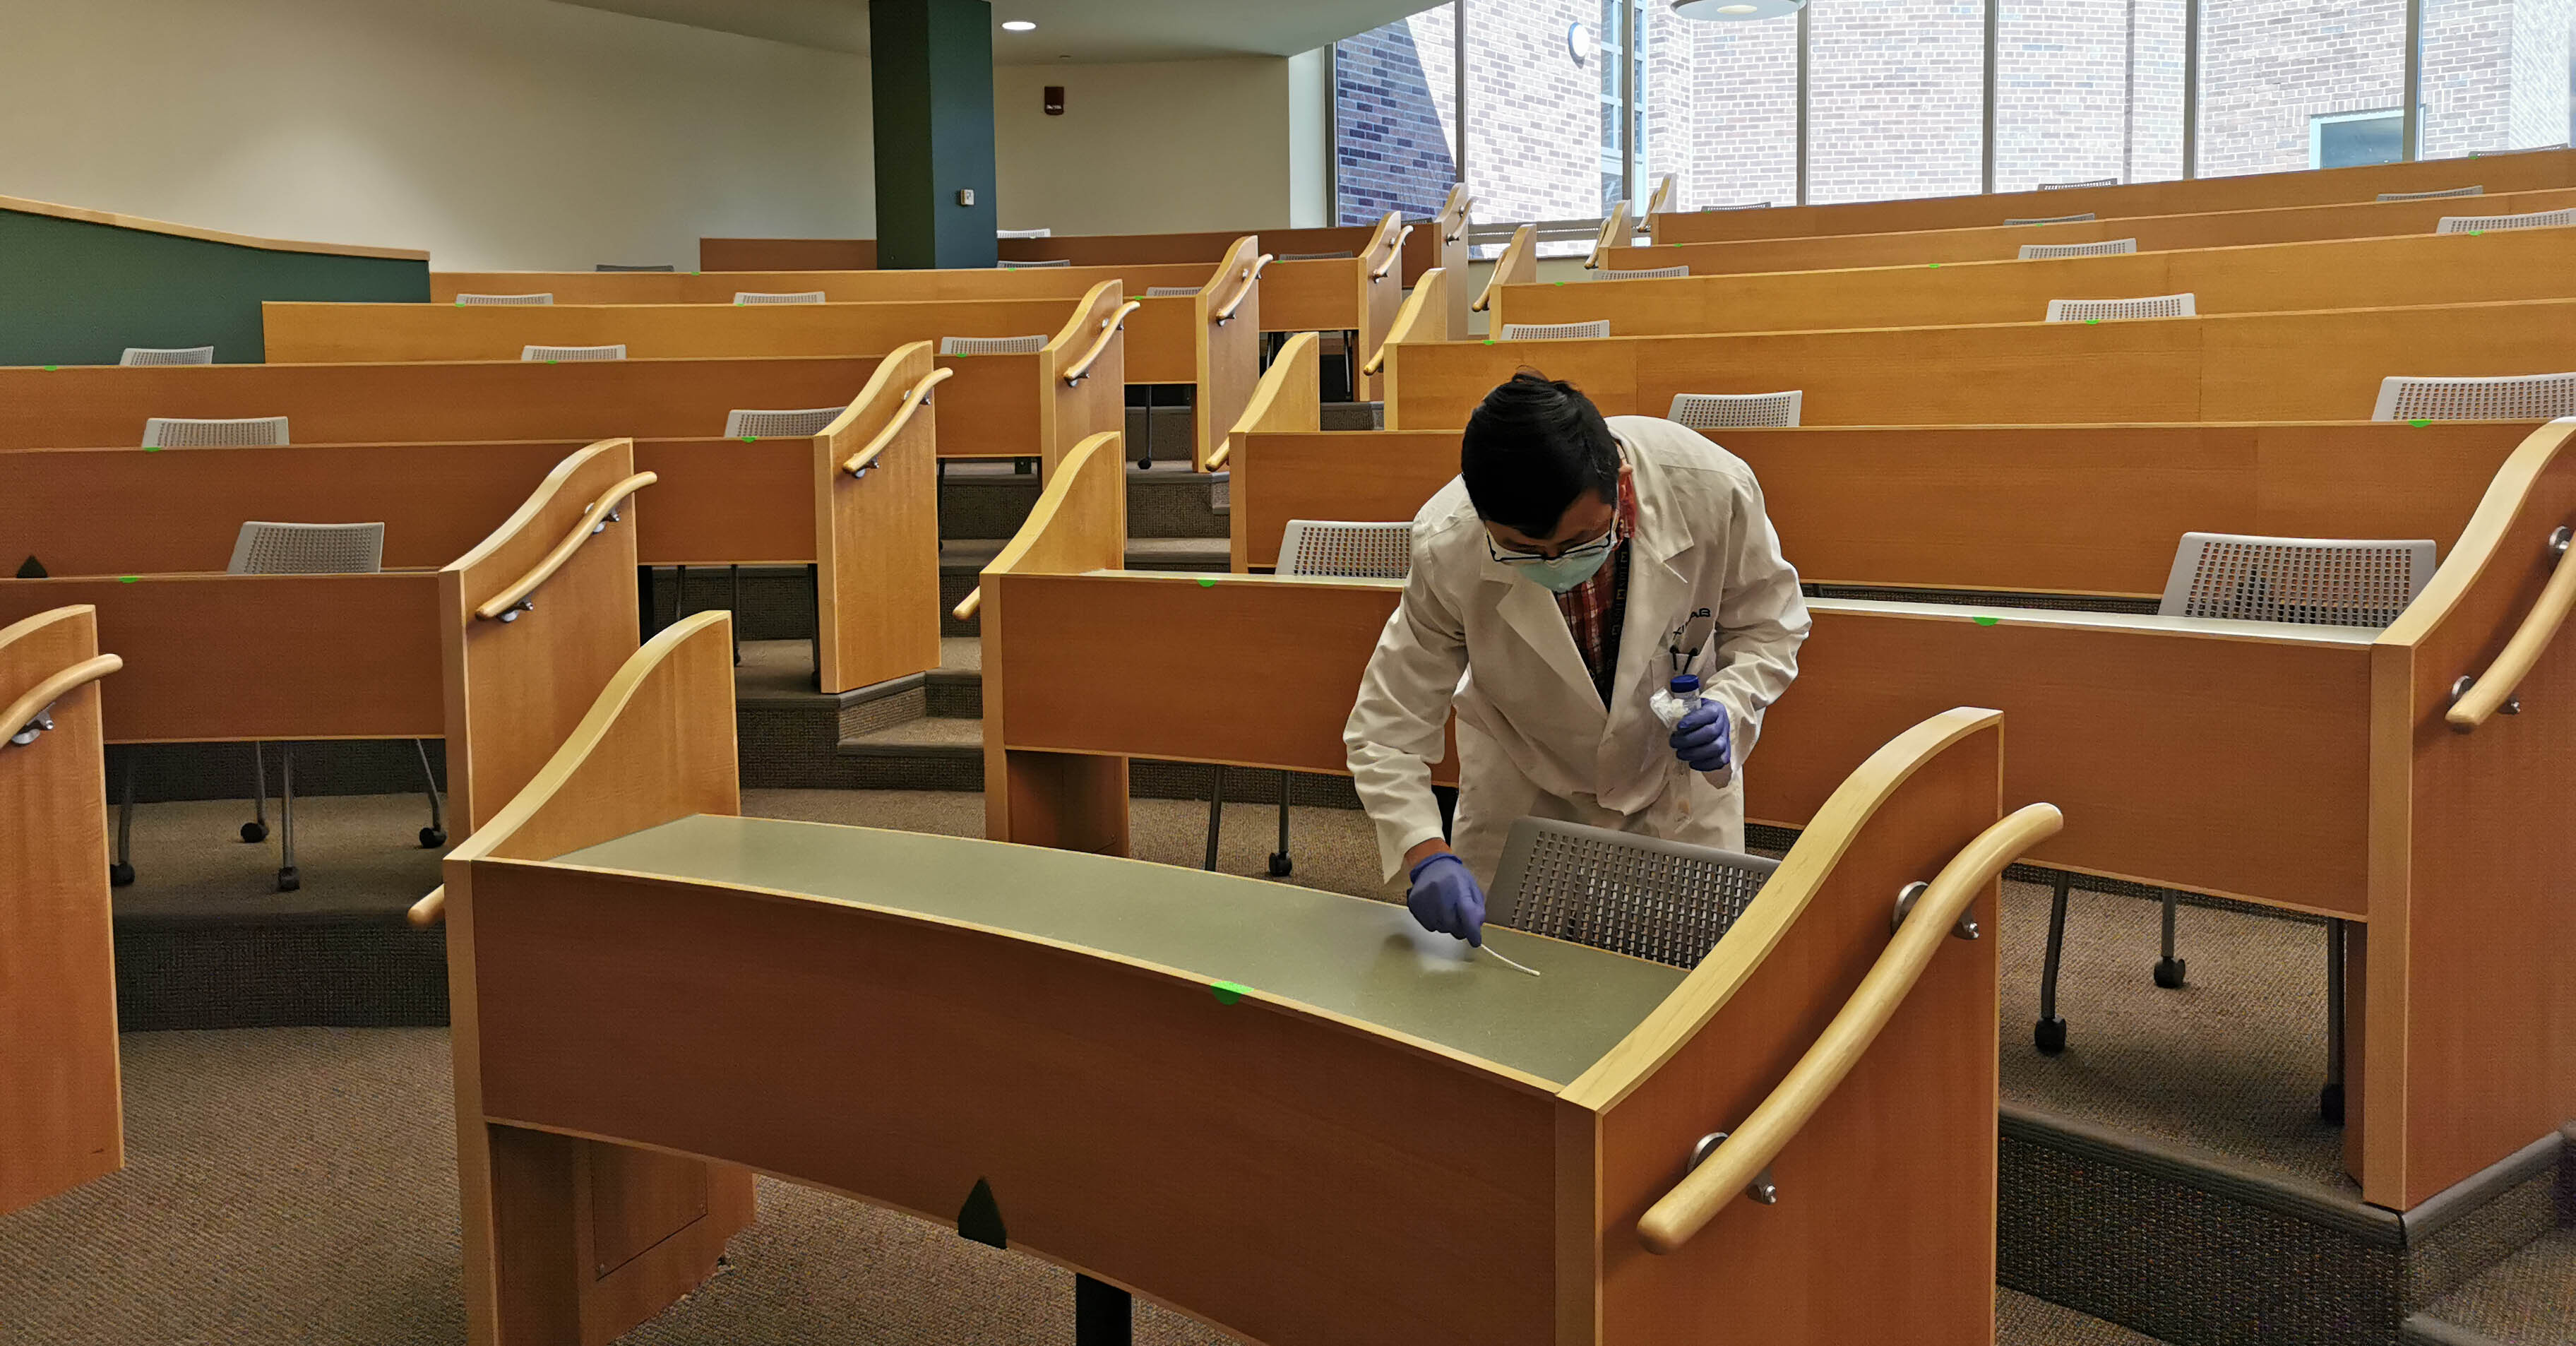 Jianfeng Wu, a research fellow at U-M's School of Public Health, collects samples of surfaces around U-M's Ann Arbor campus